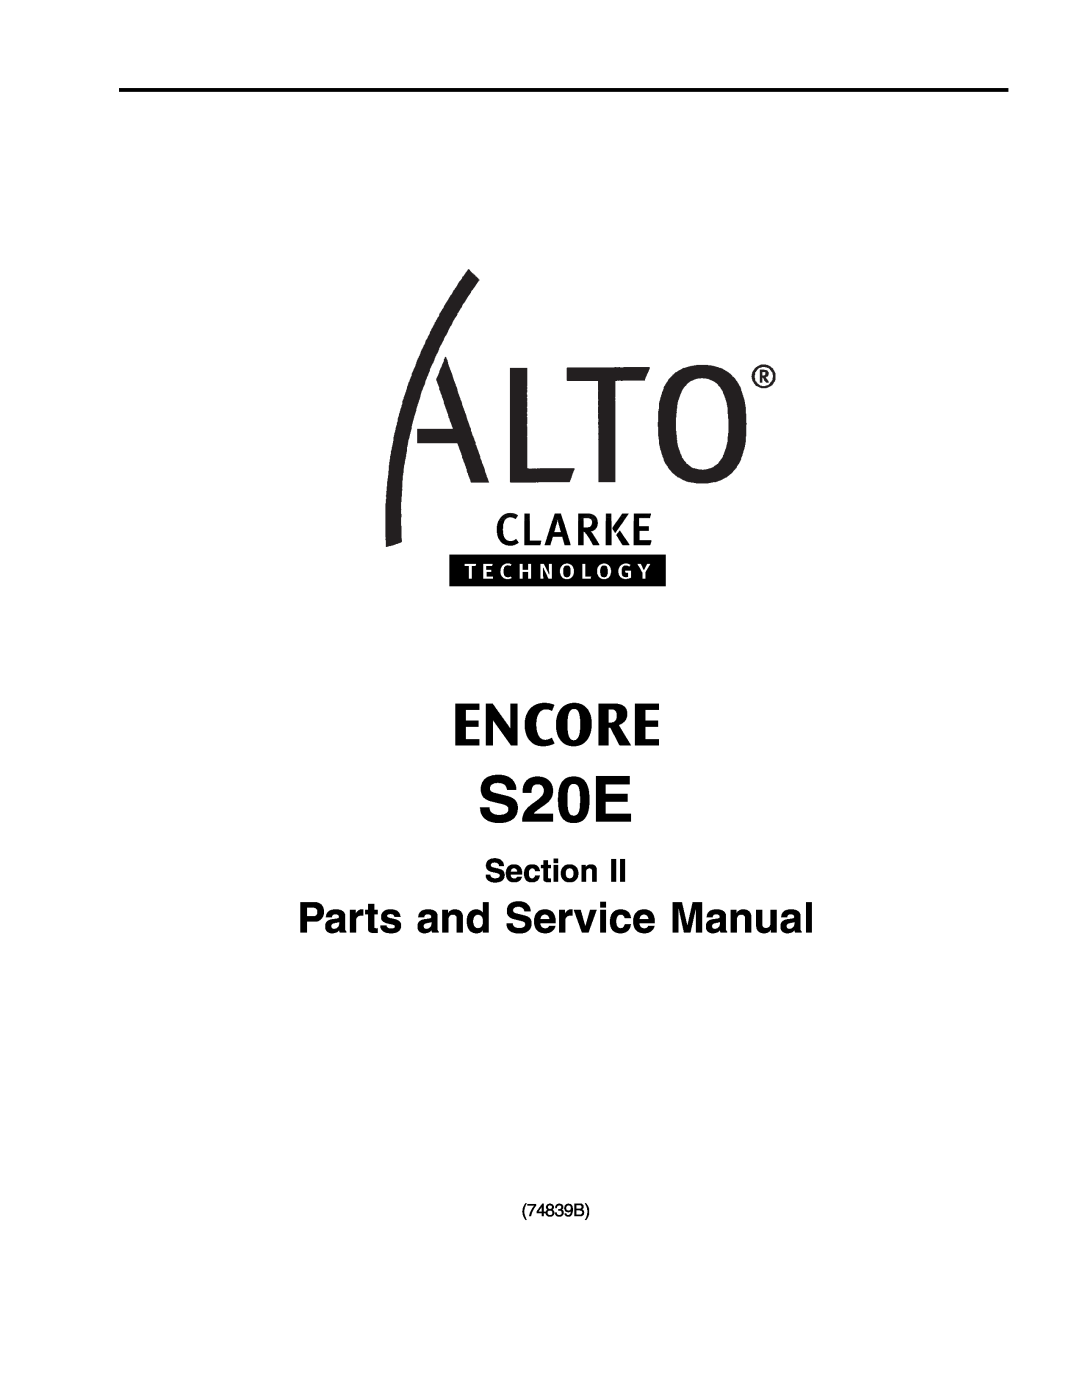 Clarke manual Parts and Service Manual, Section, 74839B, CLARKE TECHNOLOGY Operators Manual -EncoreS20E, Page 